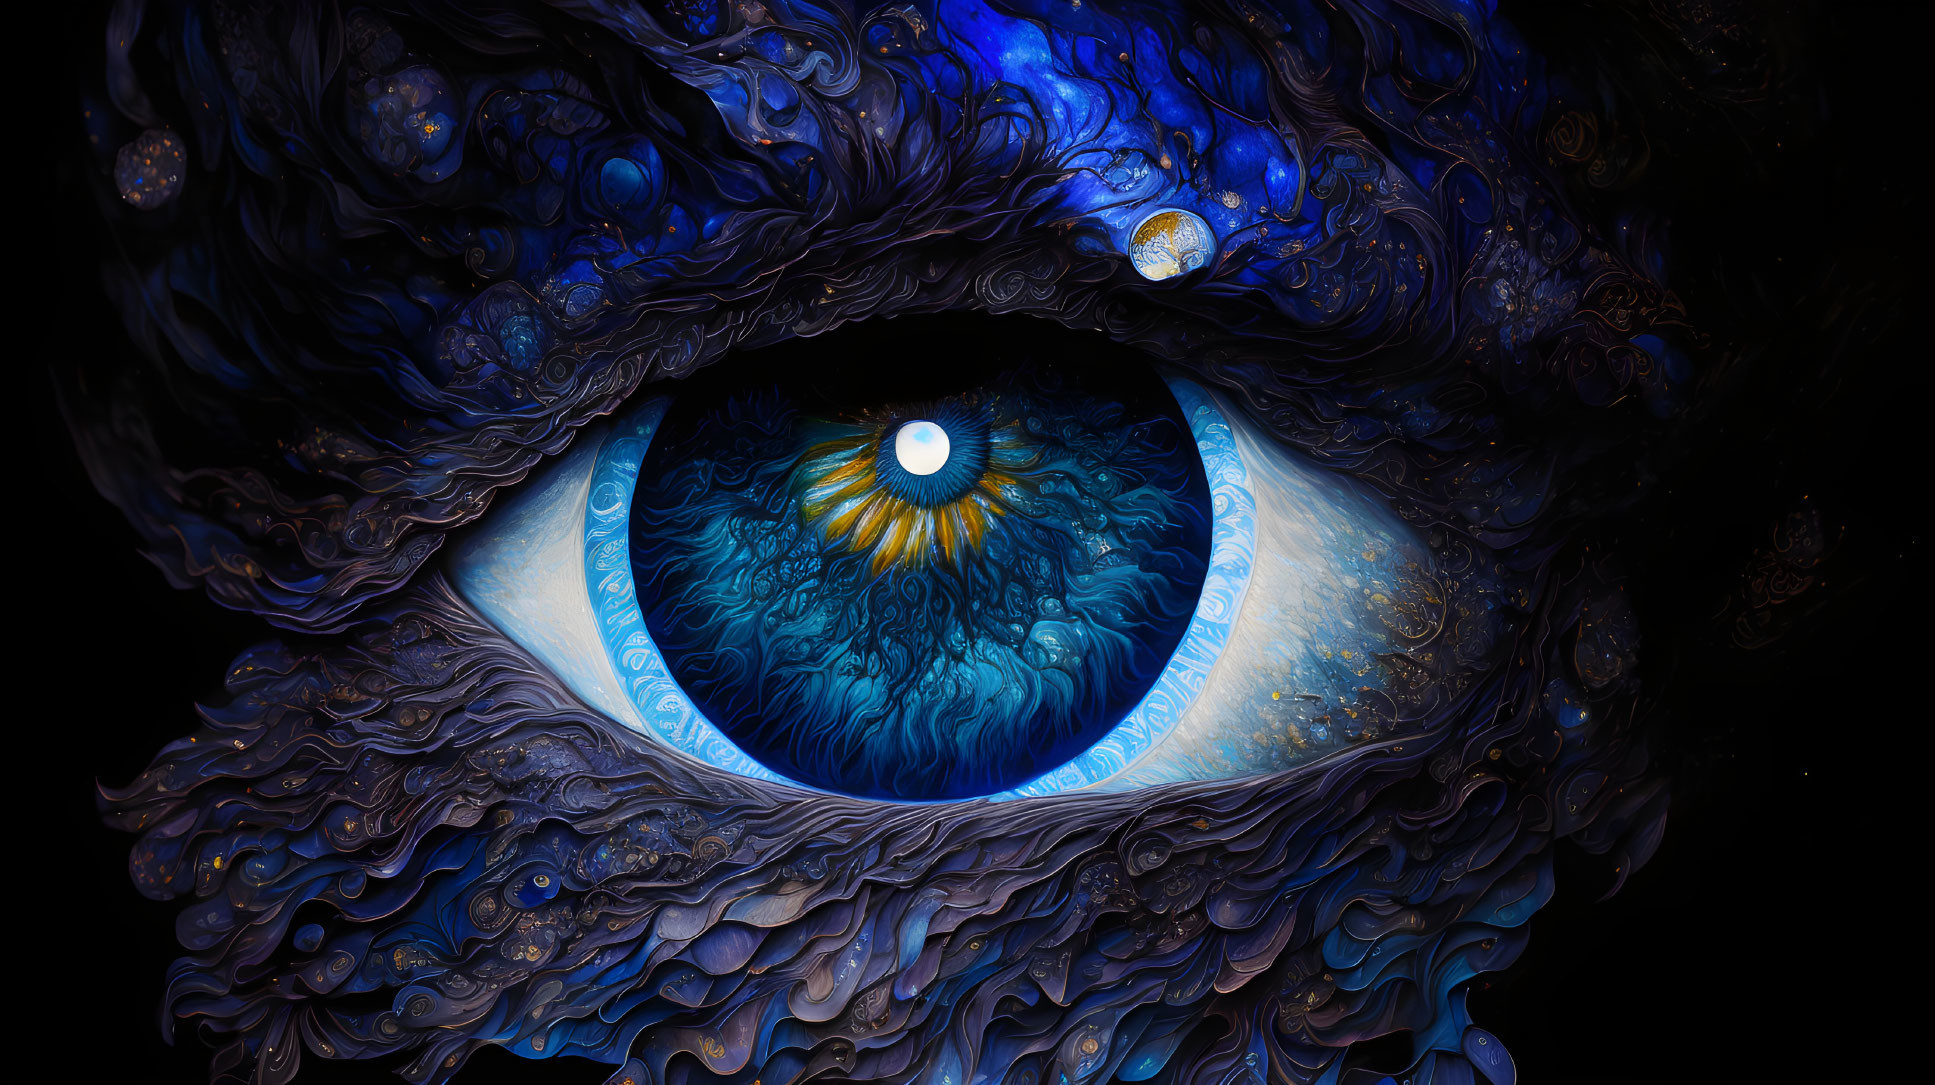 Detailed Eye Illustration with Swirling Blue and Black Cosmic Patterns